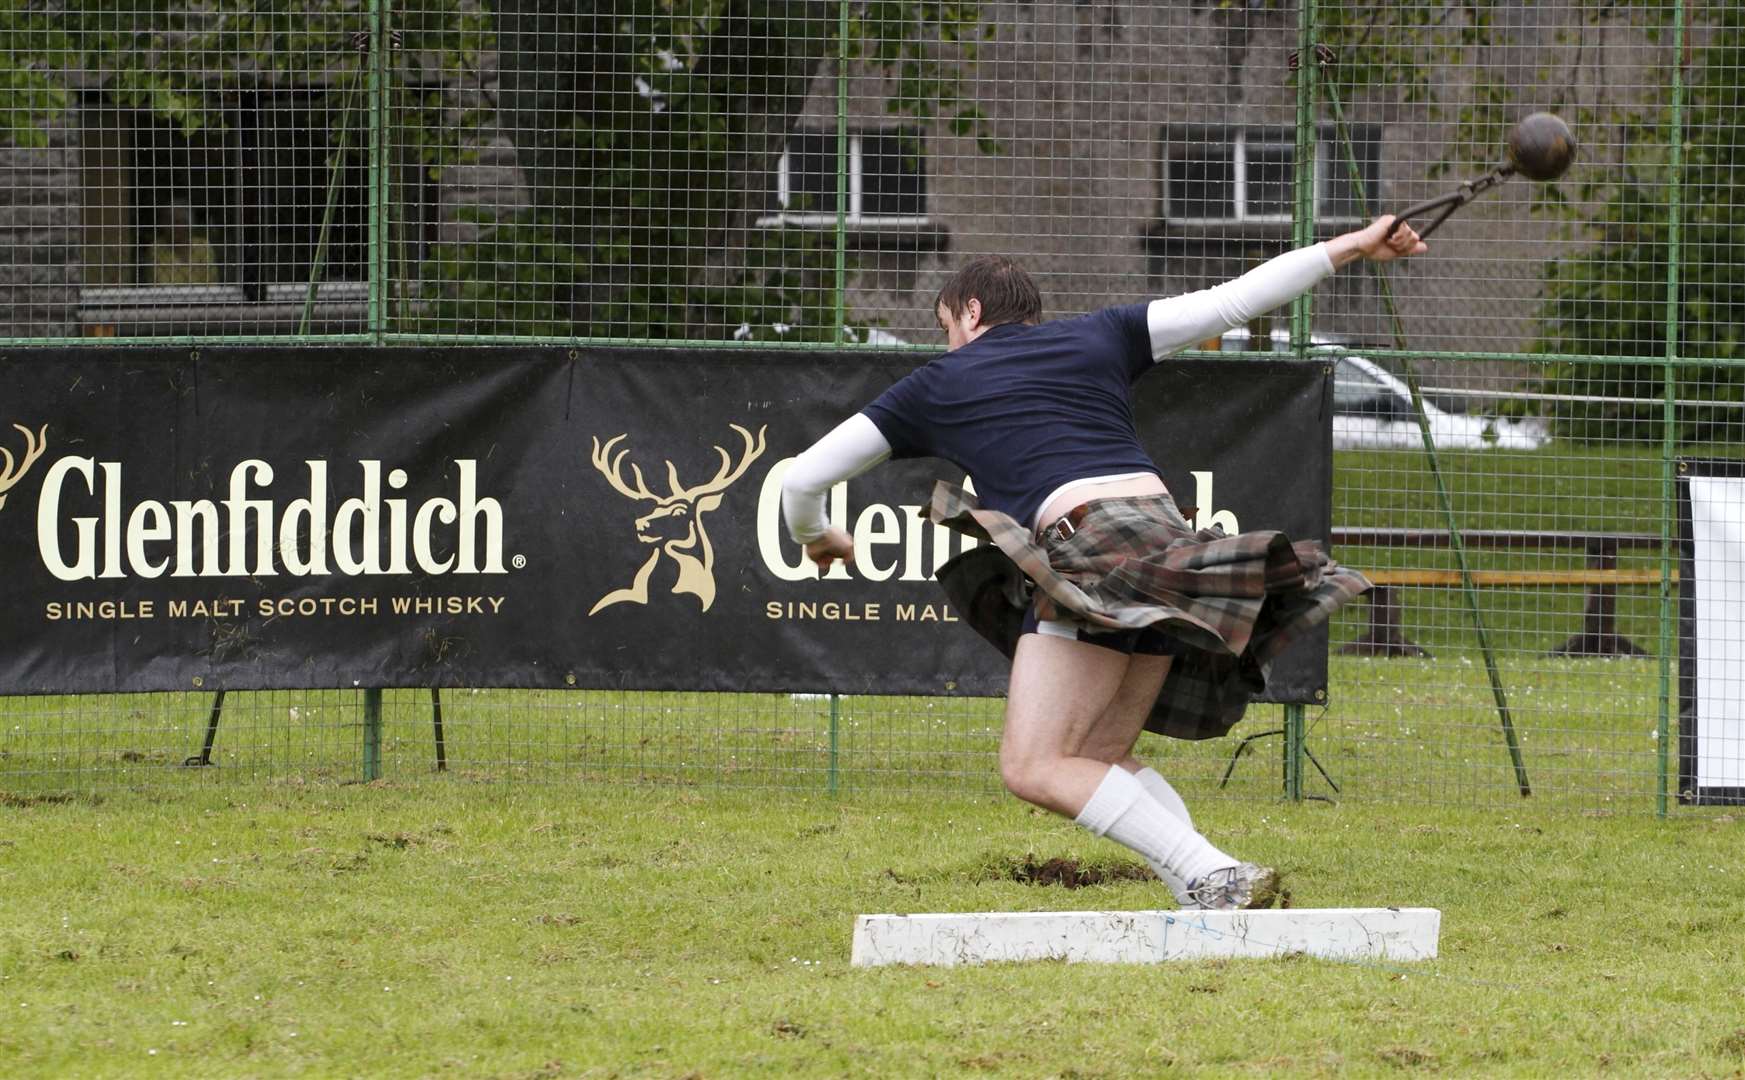 Meldrum Sports draws heavy event competitors from across the country.